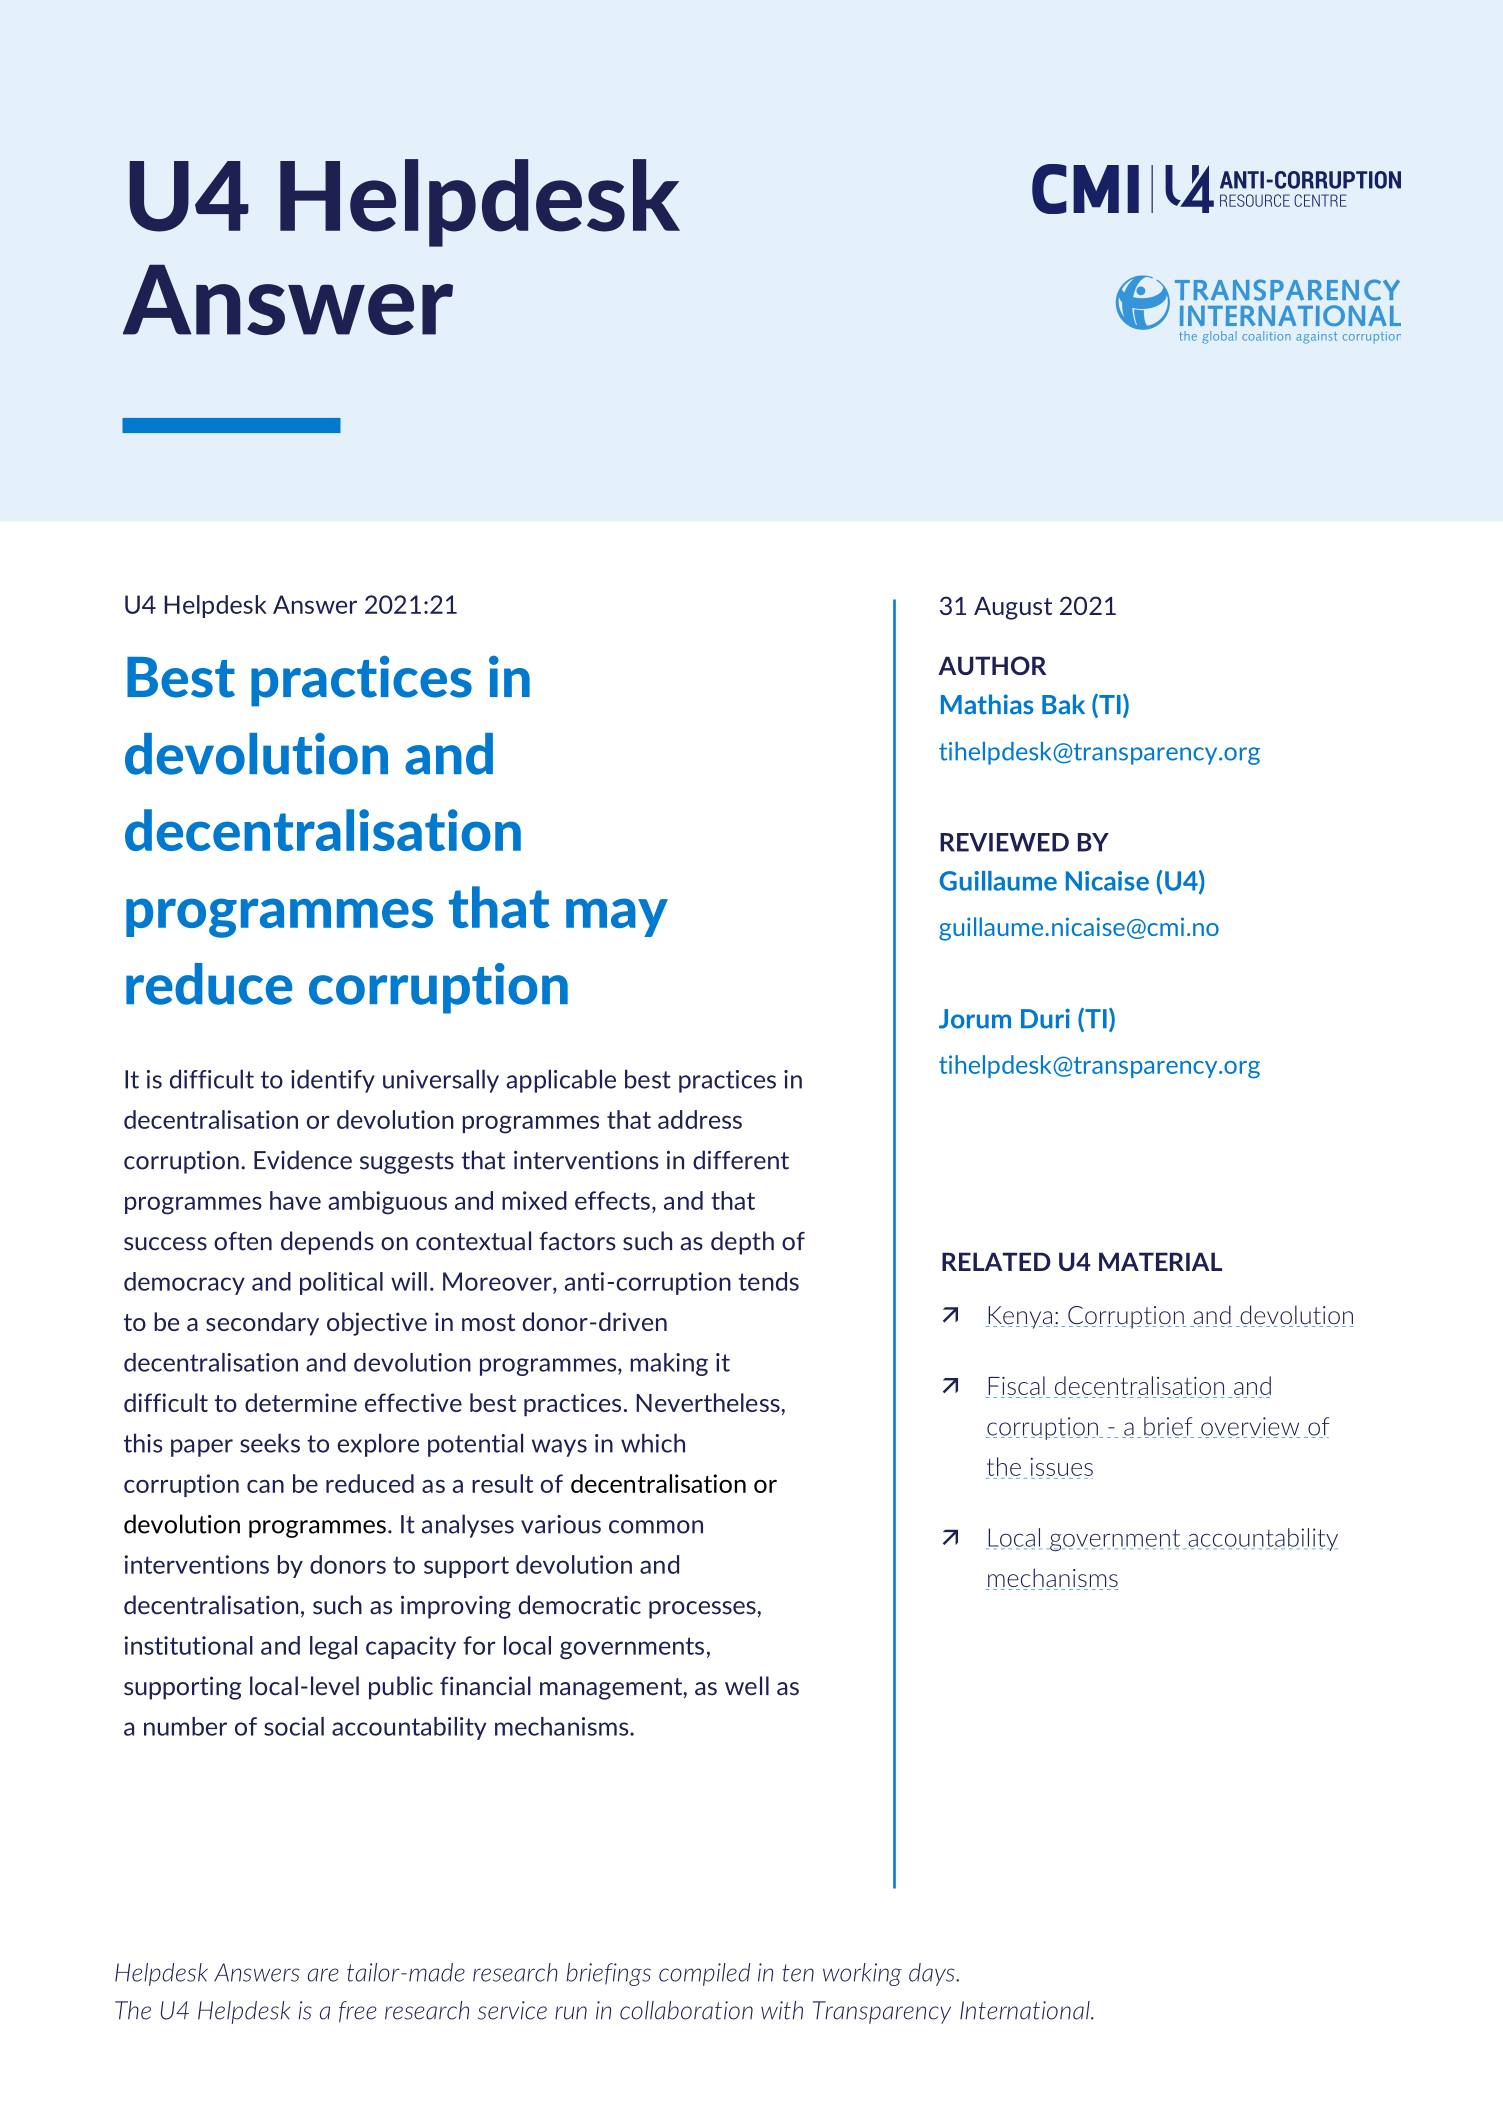 Best practices in devolution and decentralisation programmes that may reduce corruption